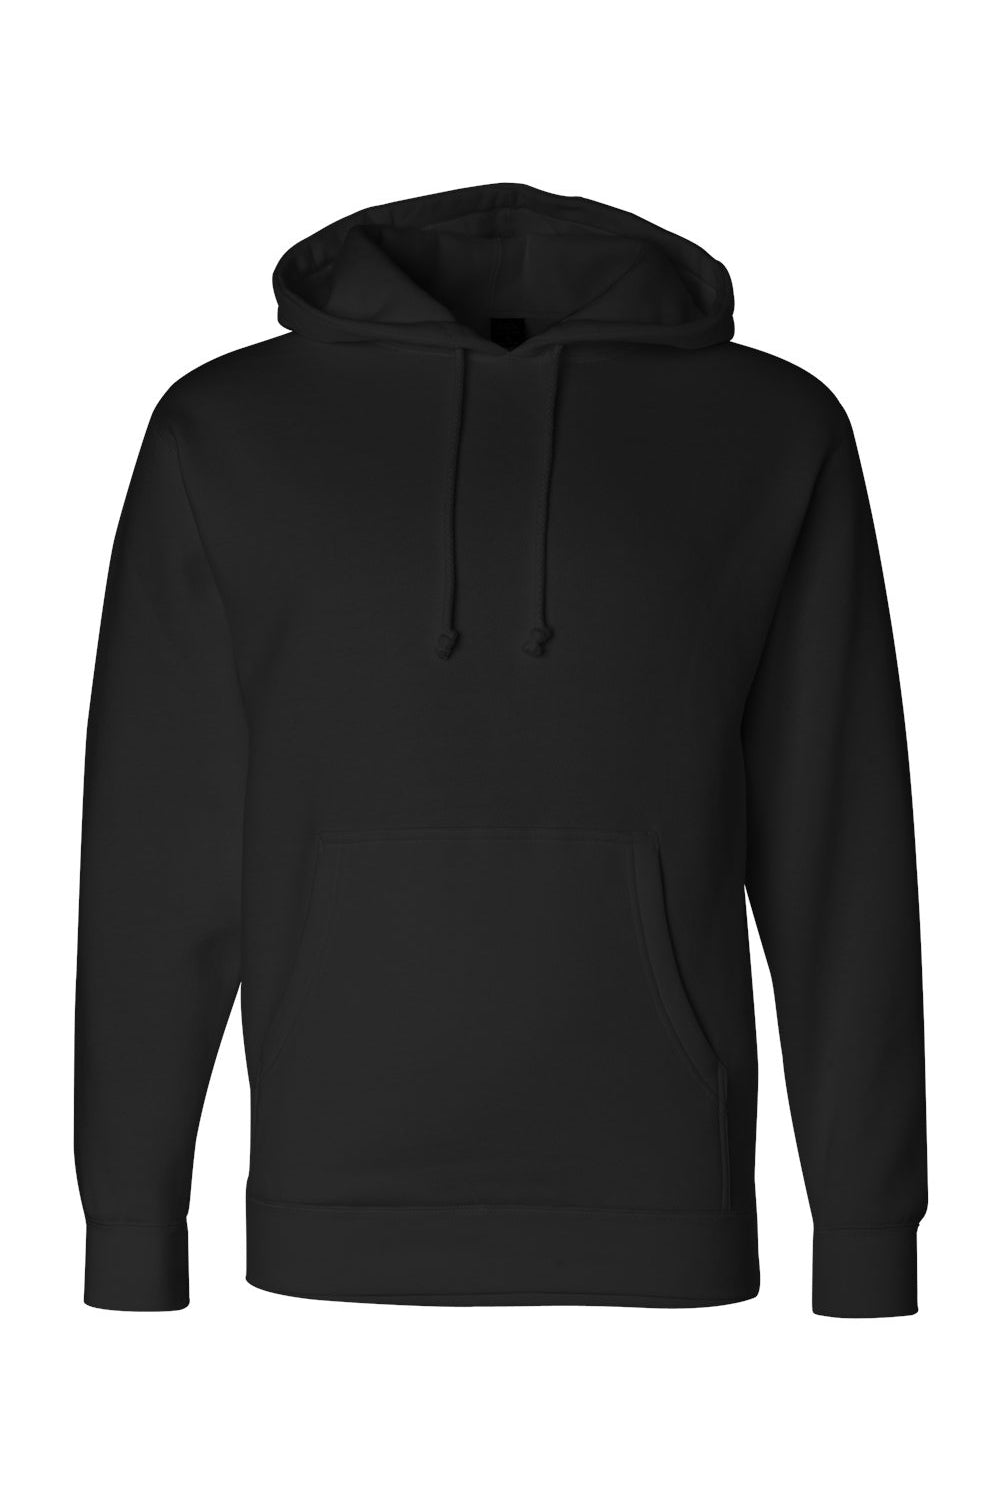 Independent Trading Co. IND4000 Mens Hooded Sweatshirt Hoodie Black Flat Front